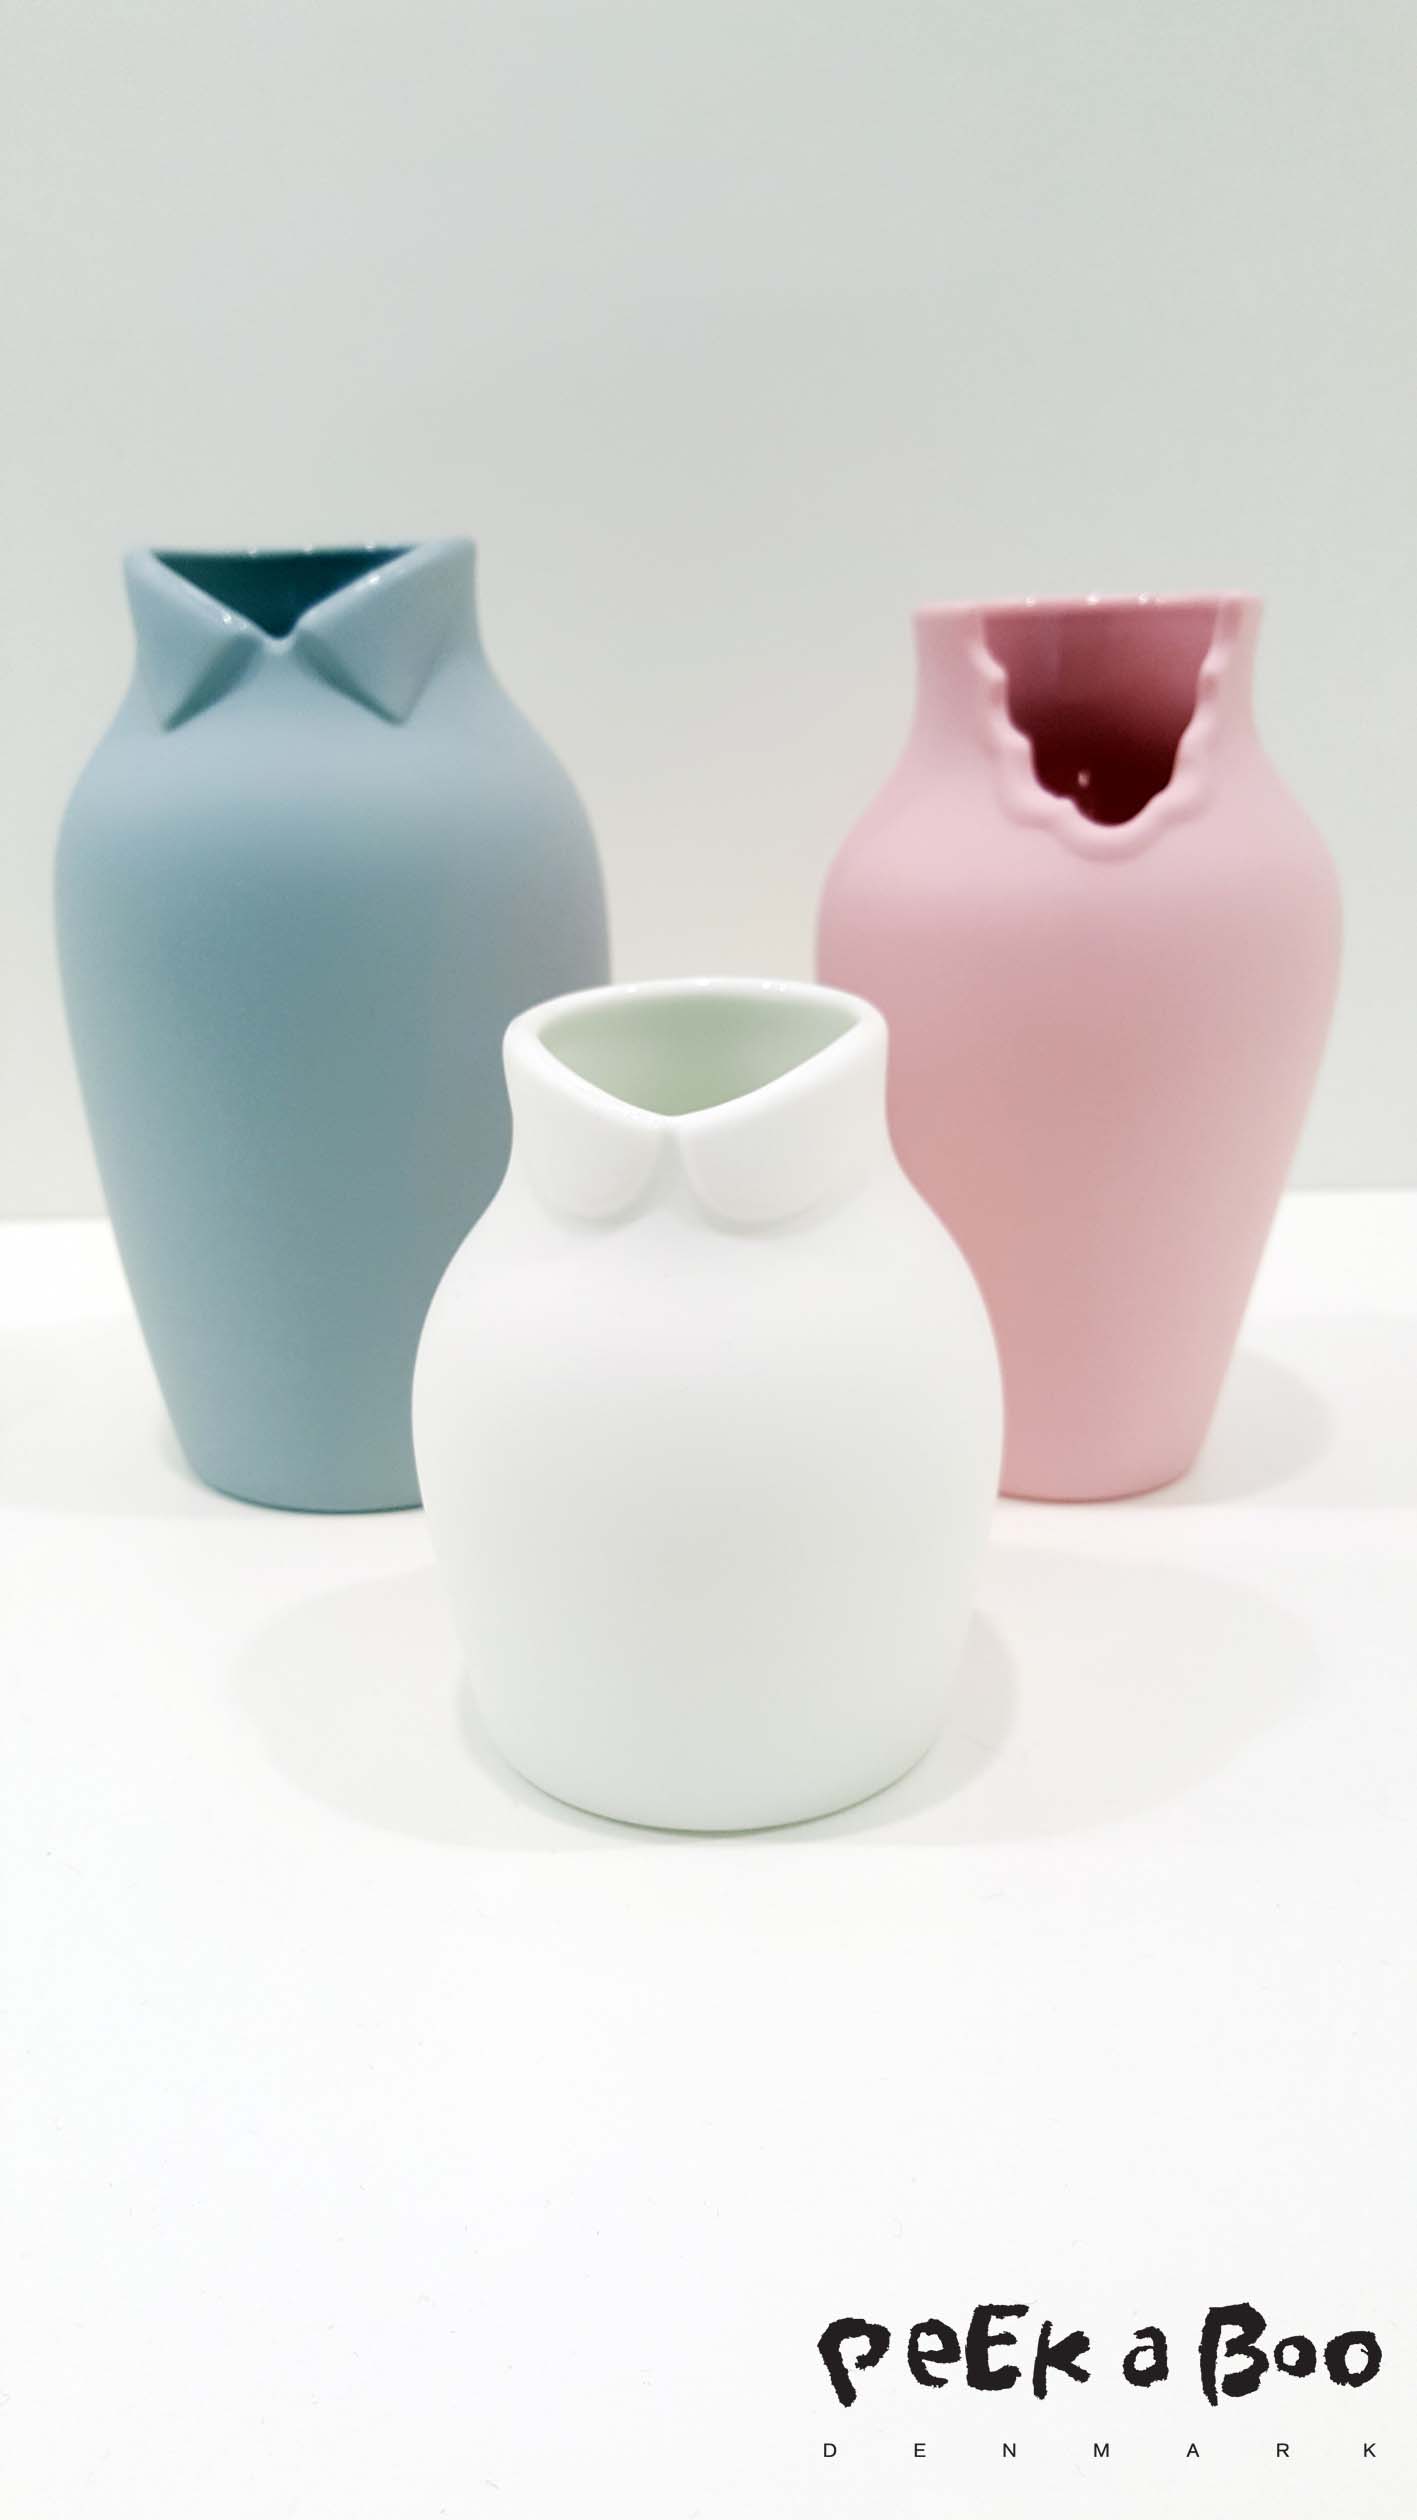 Ceramic japan made these cute vases in pastel colours and they are called "dress up".